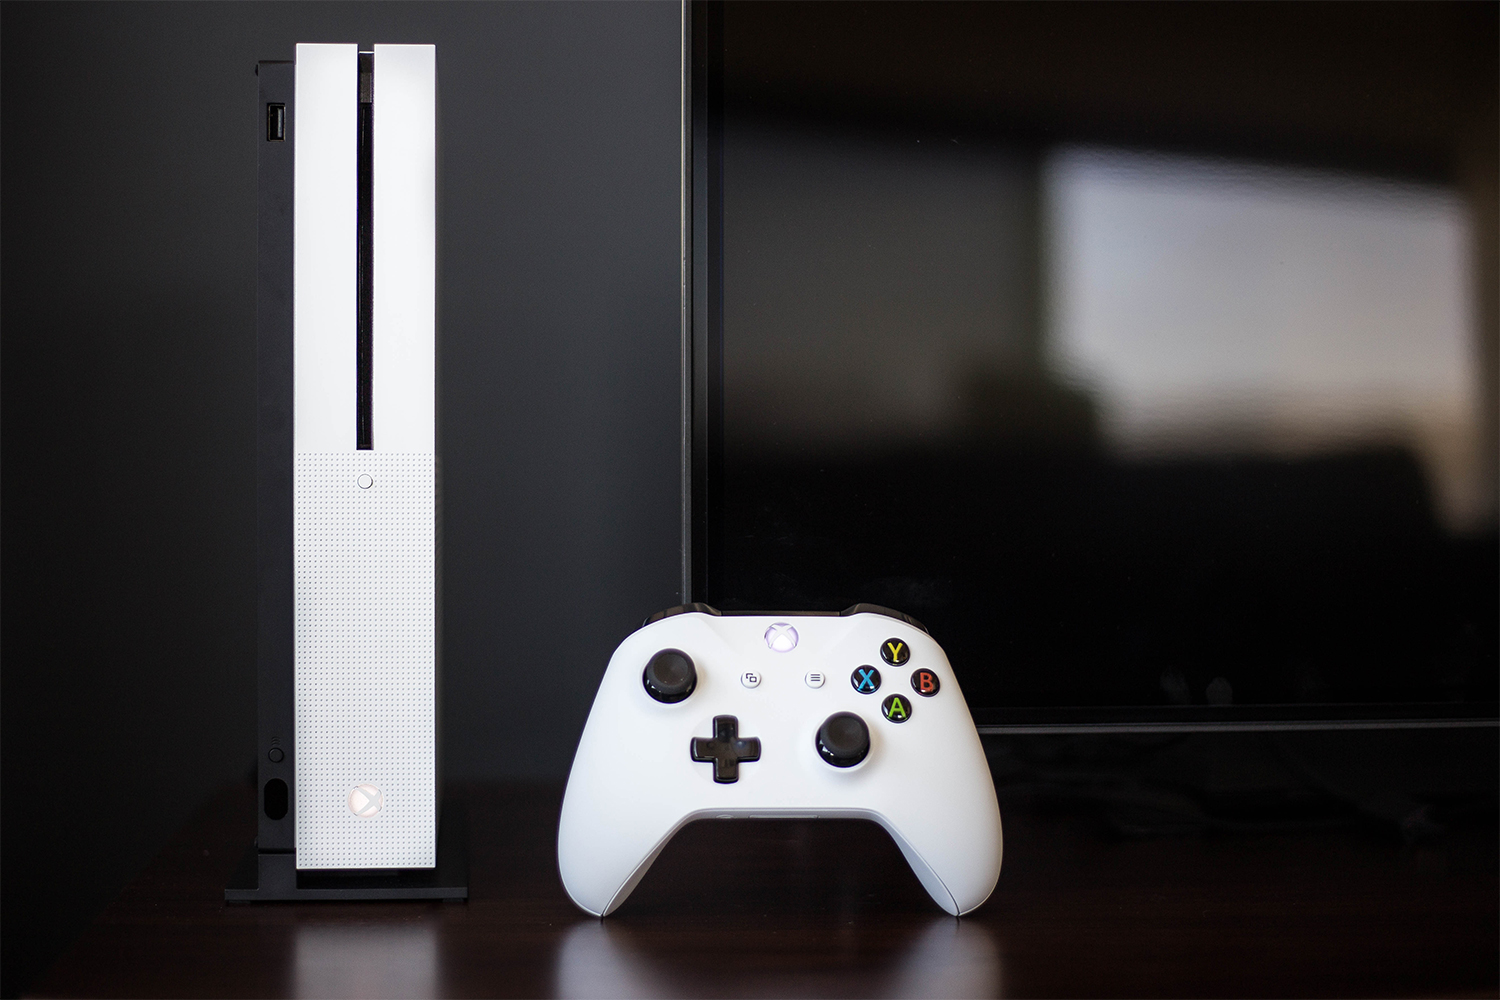 Xbox One S review: A slimmer gaming console but not a required